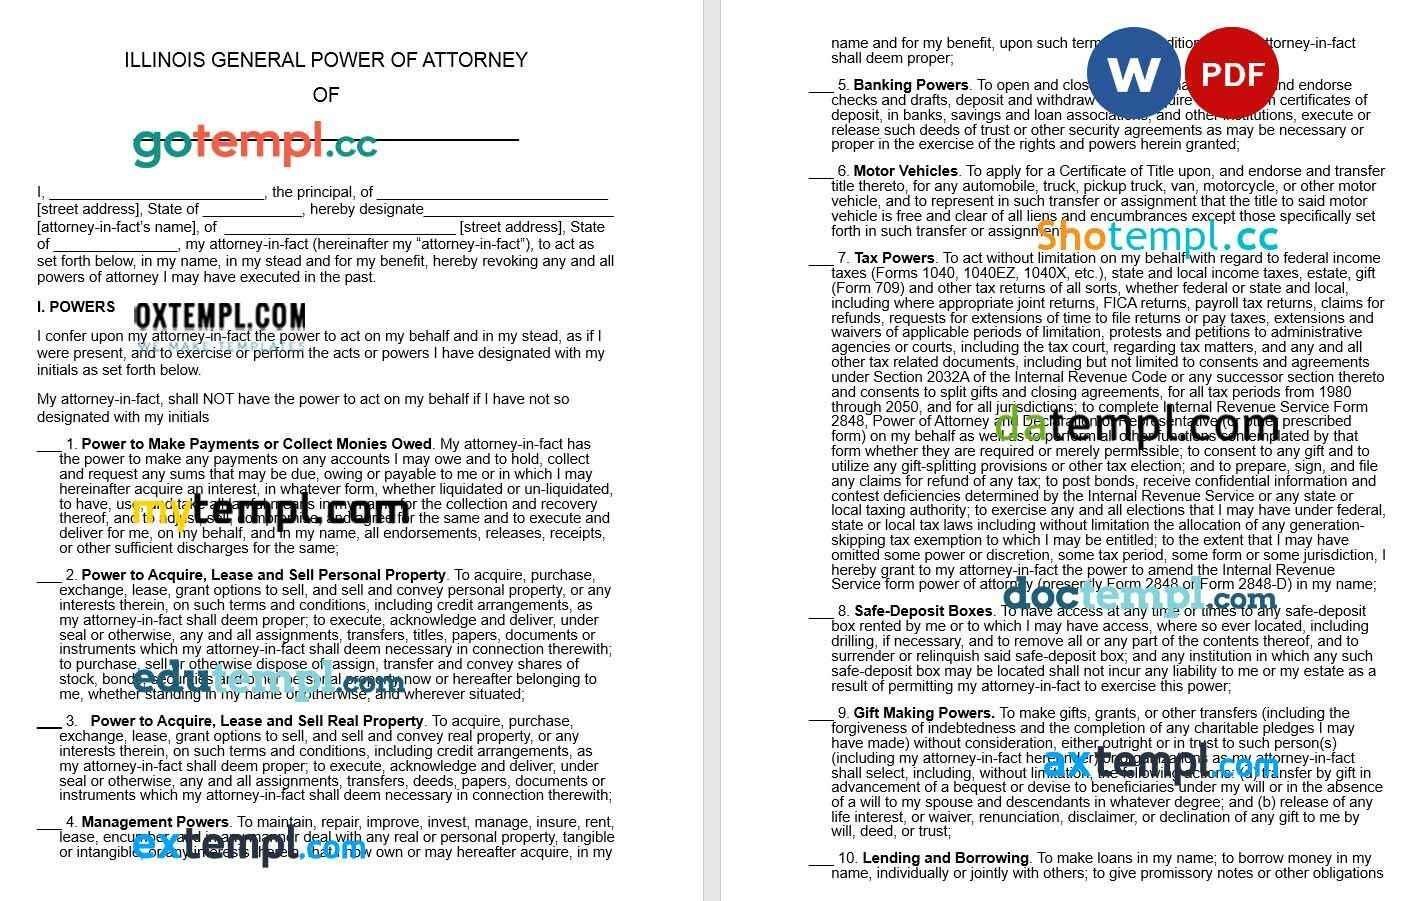 Illinois General Power of Attorney example, fully editable